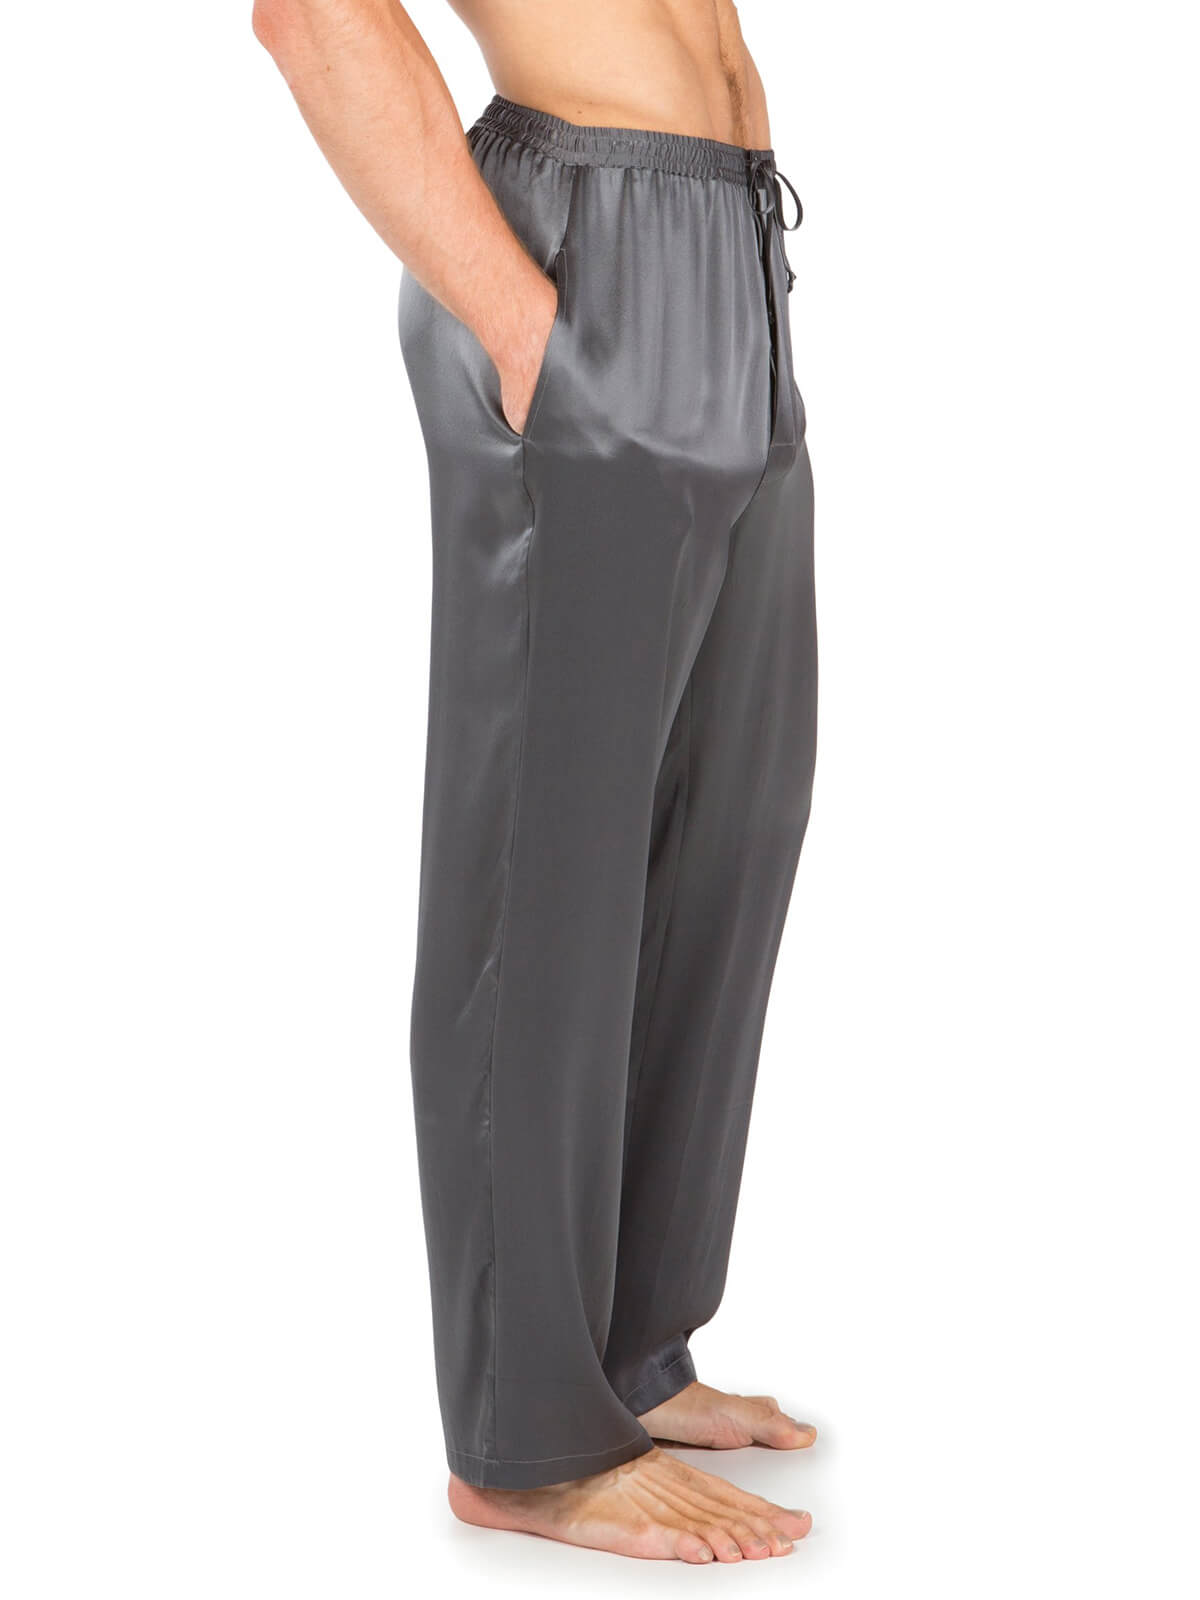 19 Momme Mens Comfortable Long Silk Pajama Pants With Drawstring [FS025] -  $129.00 : FreedomSilk, Best Silk Pillowcases, Silk Sheets, Silk Pajamas For  Women, Silk Nightgowns Online Store